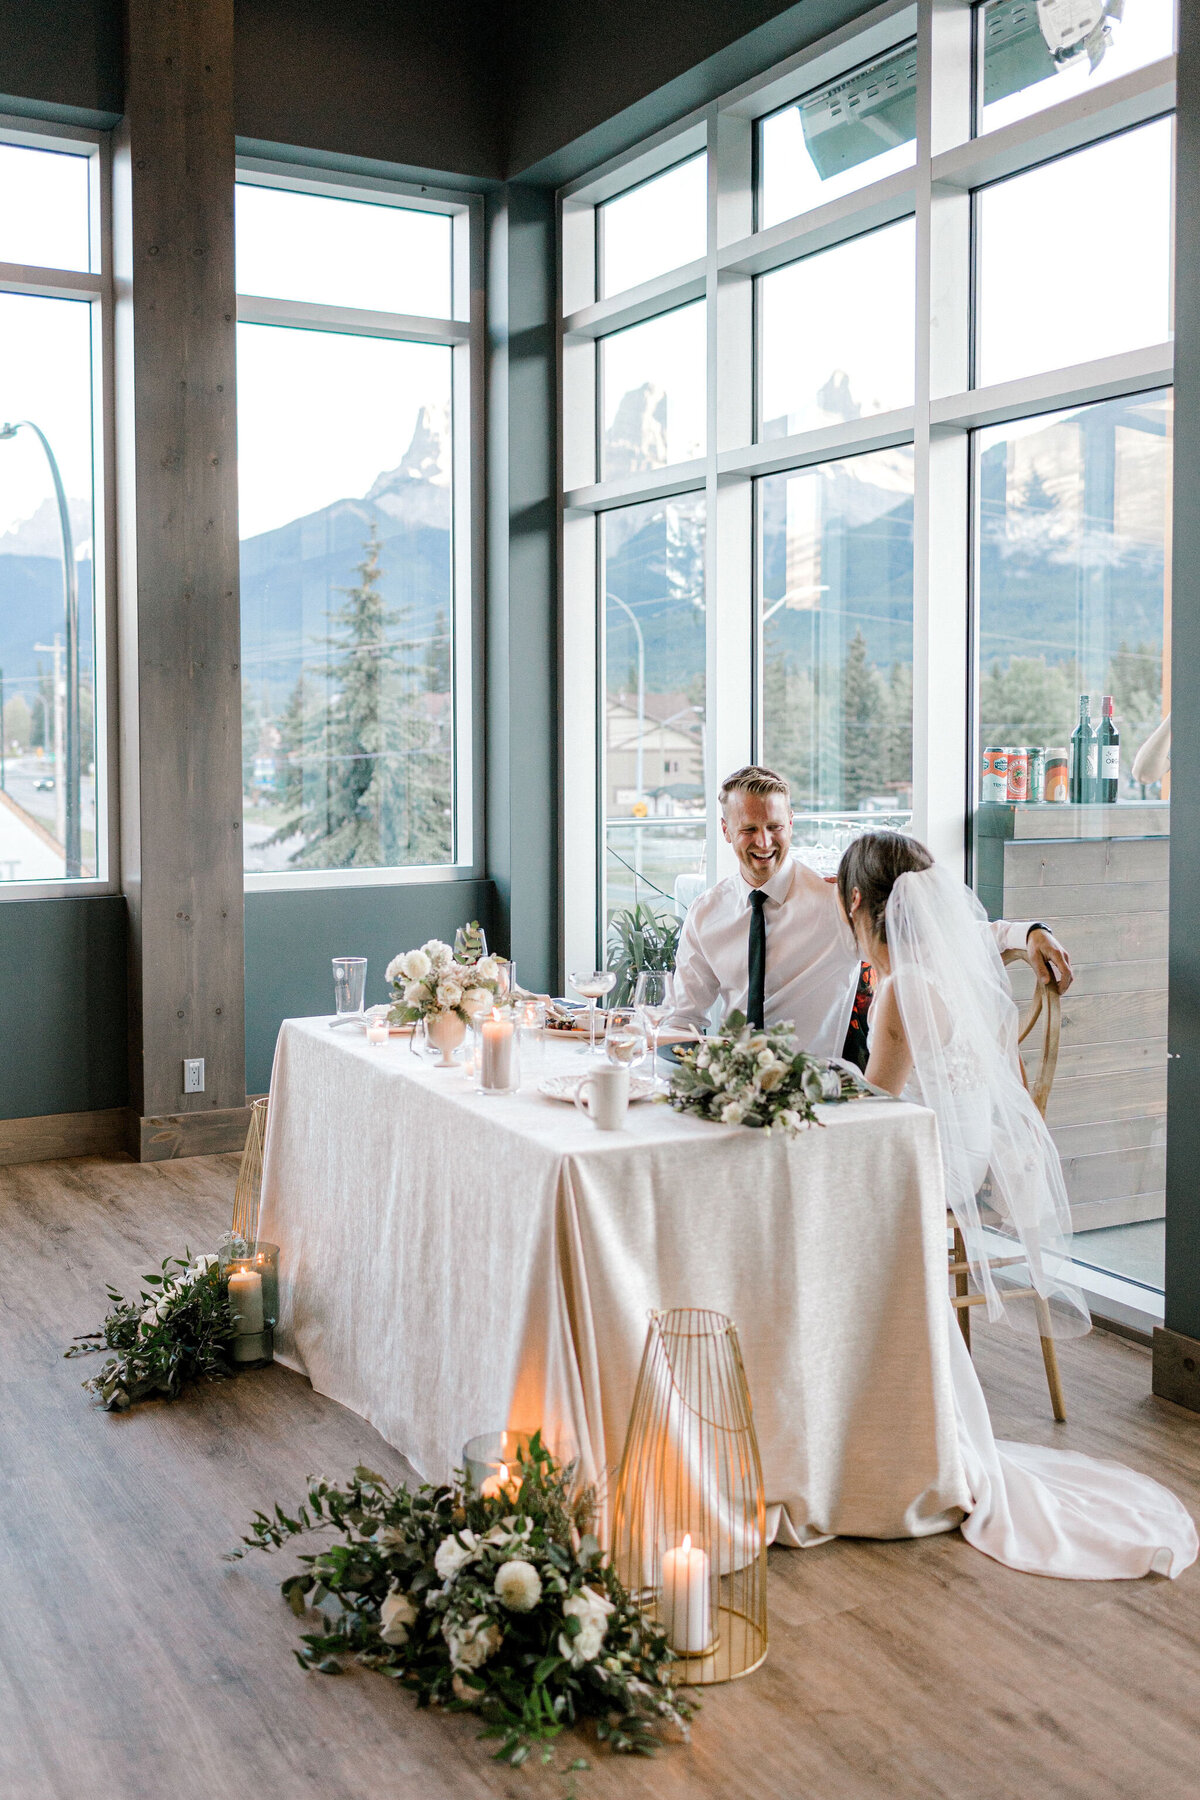 Bride and groom at sweetheart table at The Sensory, a romantic wedding venue in Canmore, Alberta featured on the Brontë Bride Vendor Guide.